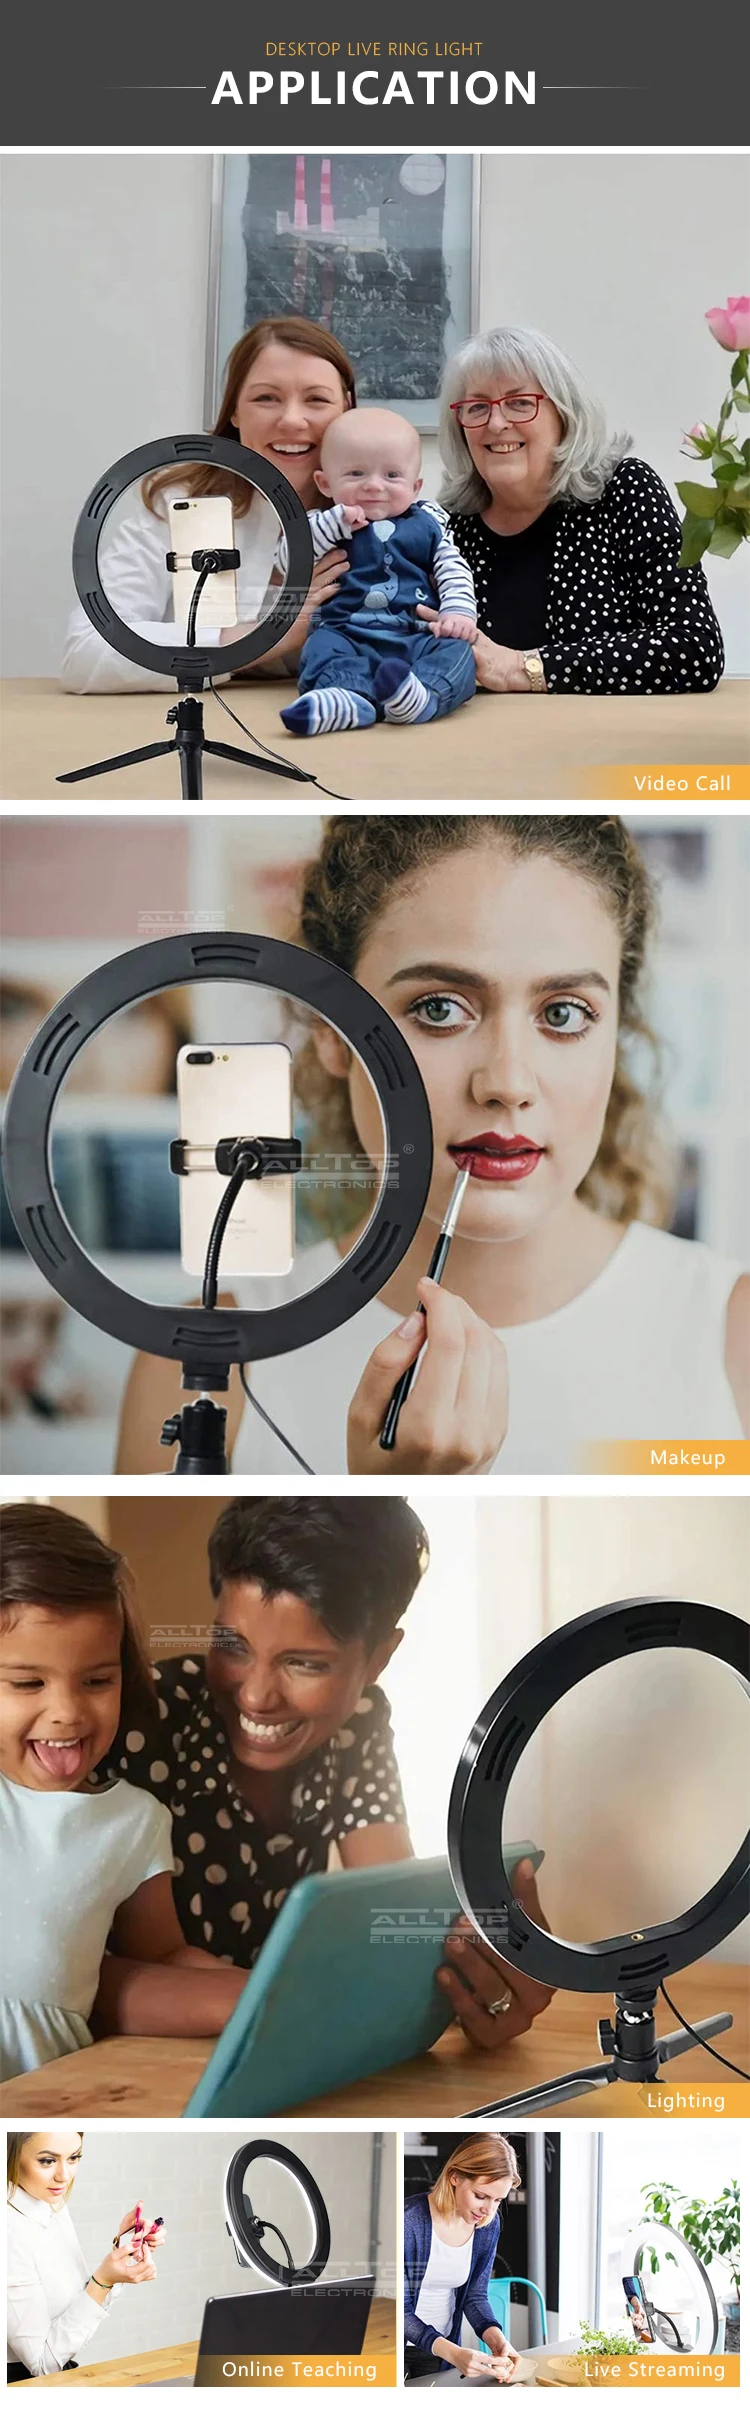 Photography Studio selfie Mobile phone stents 10 Inch Live broadcast led ring light